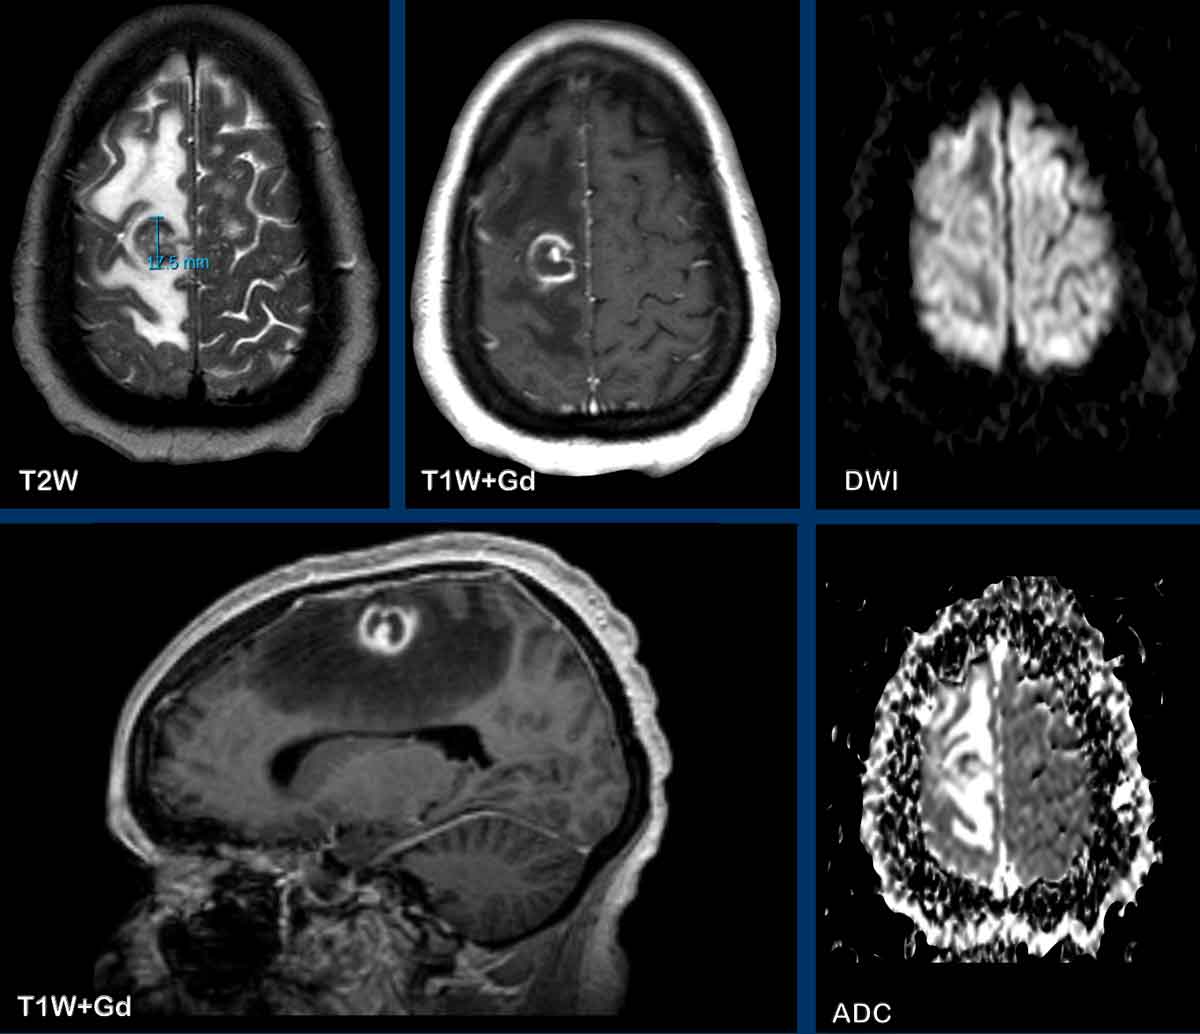 Ring enhancing brain lesions in a patient with Acquired Immunodeficiency  Syndrome (AIDS): a diagnostic dilemma